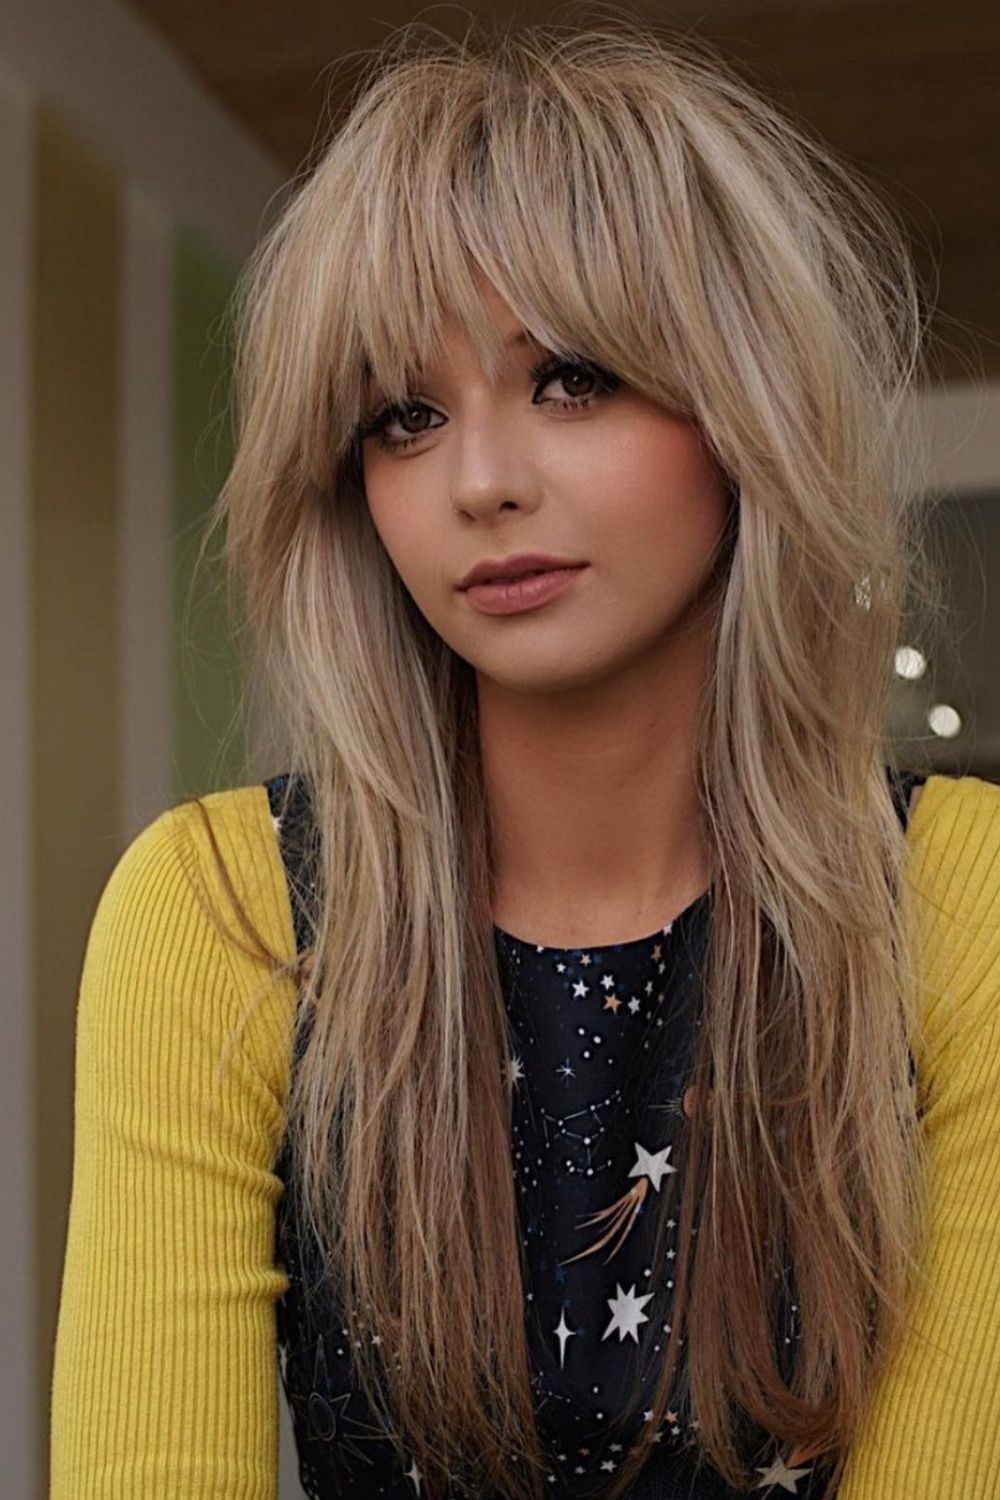 Cute Long Layered Hair with bangs for straight hair and curly hair